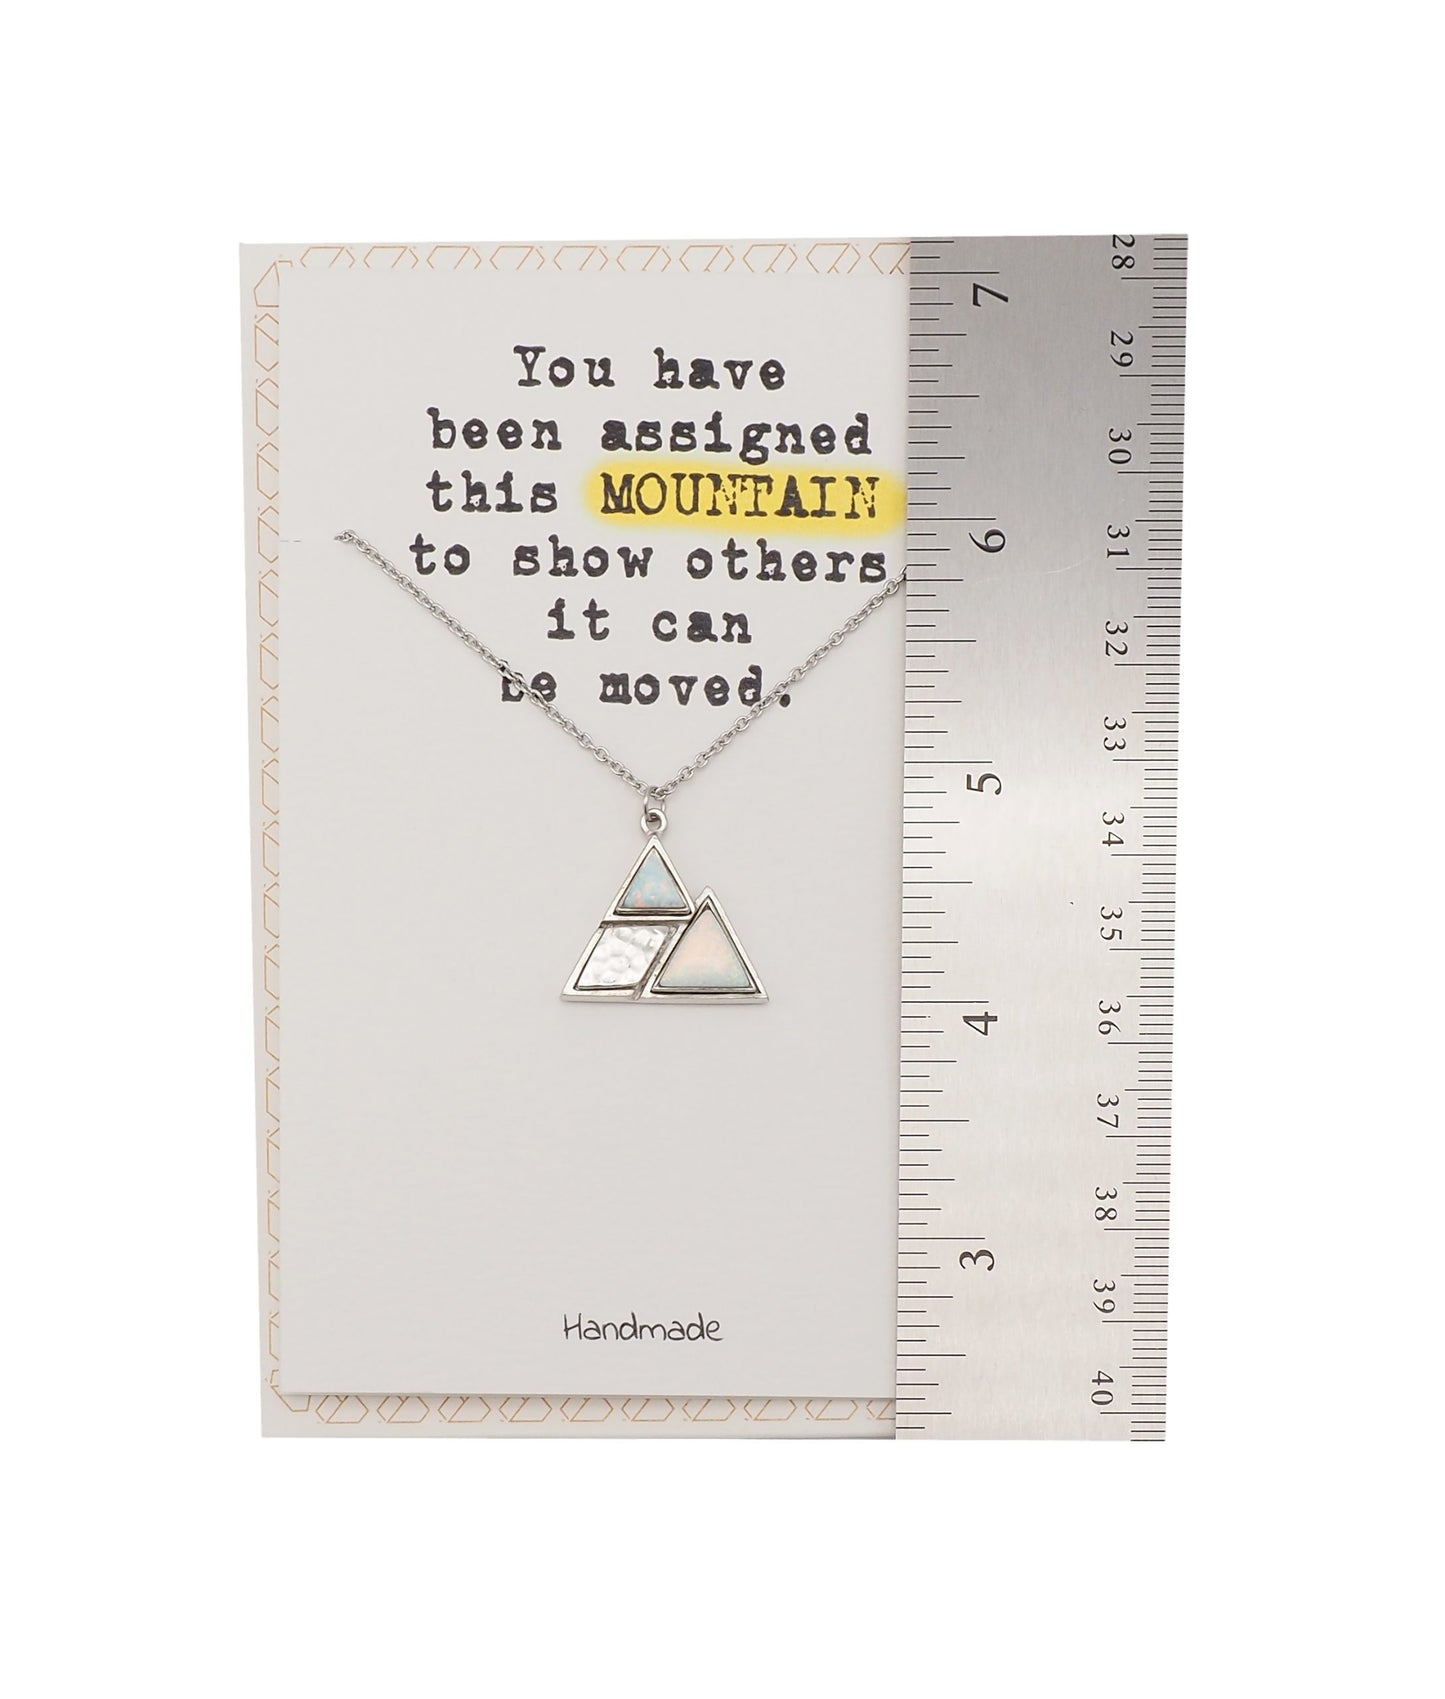 Quinnlyn & Co. Mountain Pendant Necklace, Gifts for Women with Motivational Quote on Greeting Card